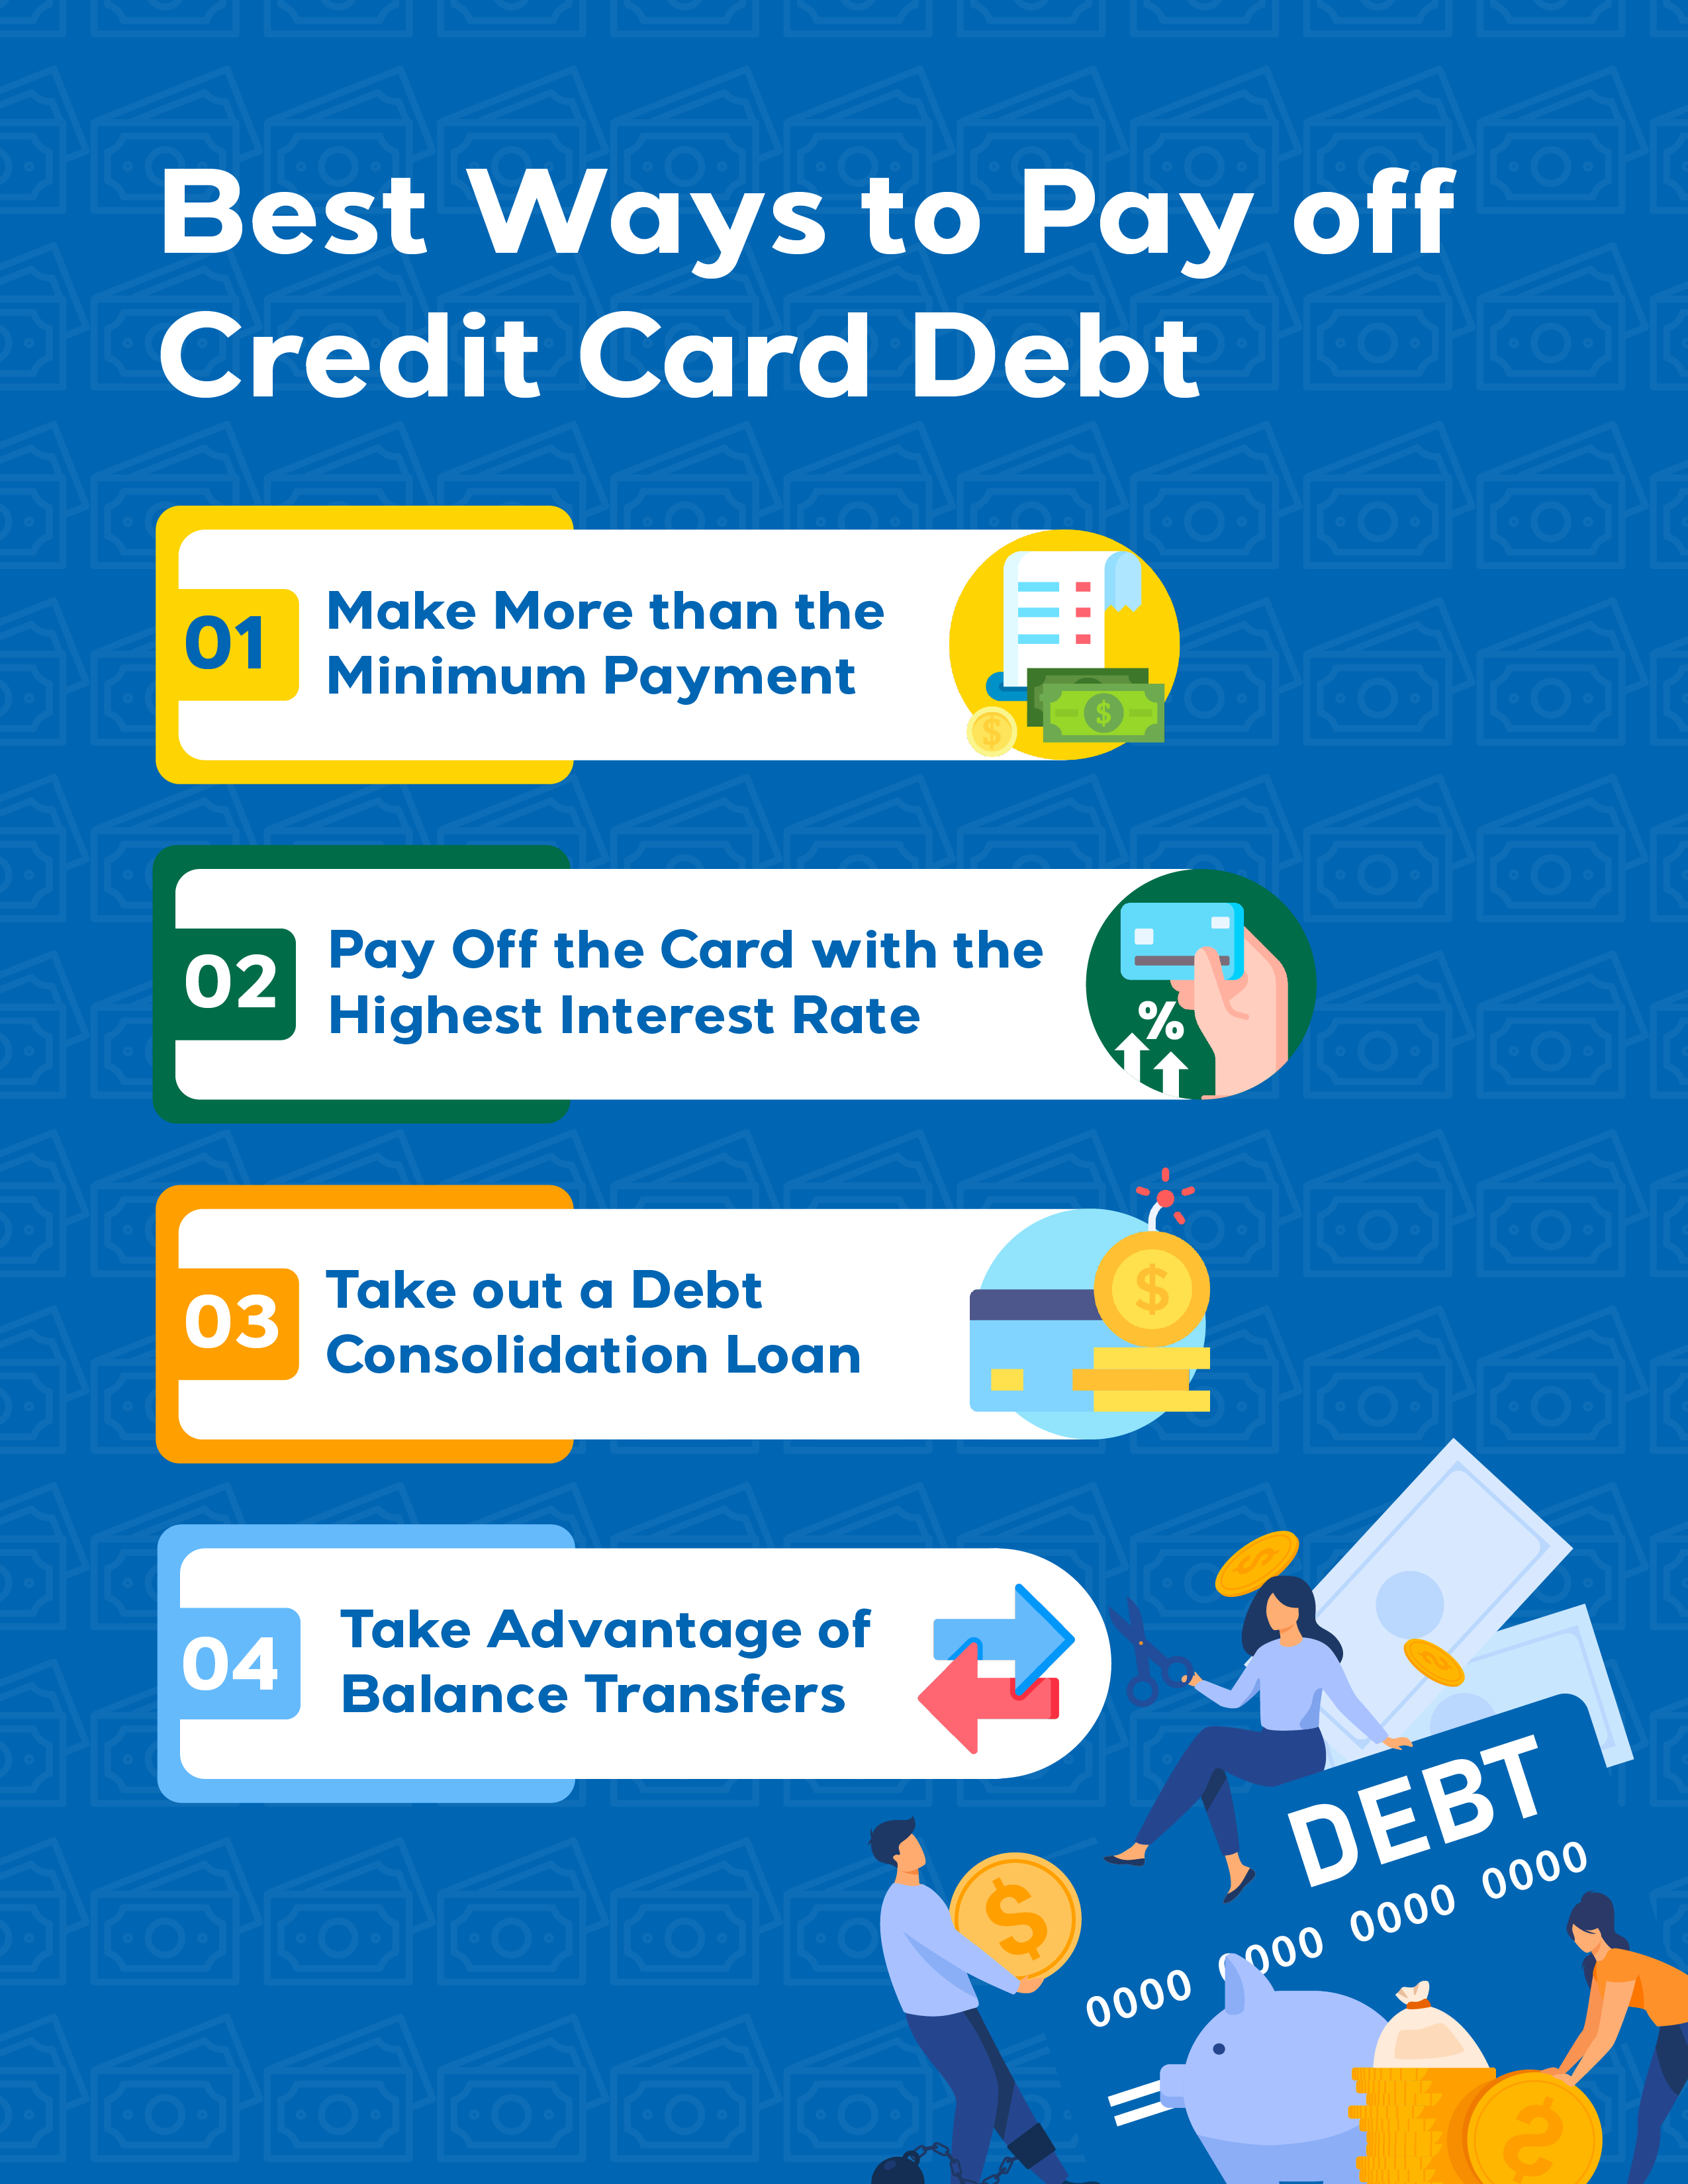 Best Ways to Pay off Credit Card Debt     1. Make More than the Minimum Payment    2. Pay Off the Card with the Highest Interest Rate    3. Take out a Debt Consolidation Loan    4. Take Advantage of Balance Transfers